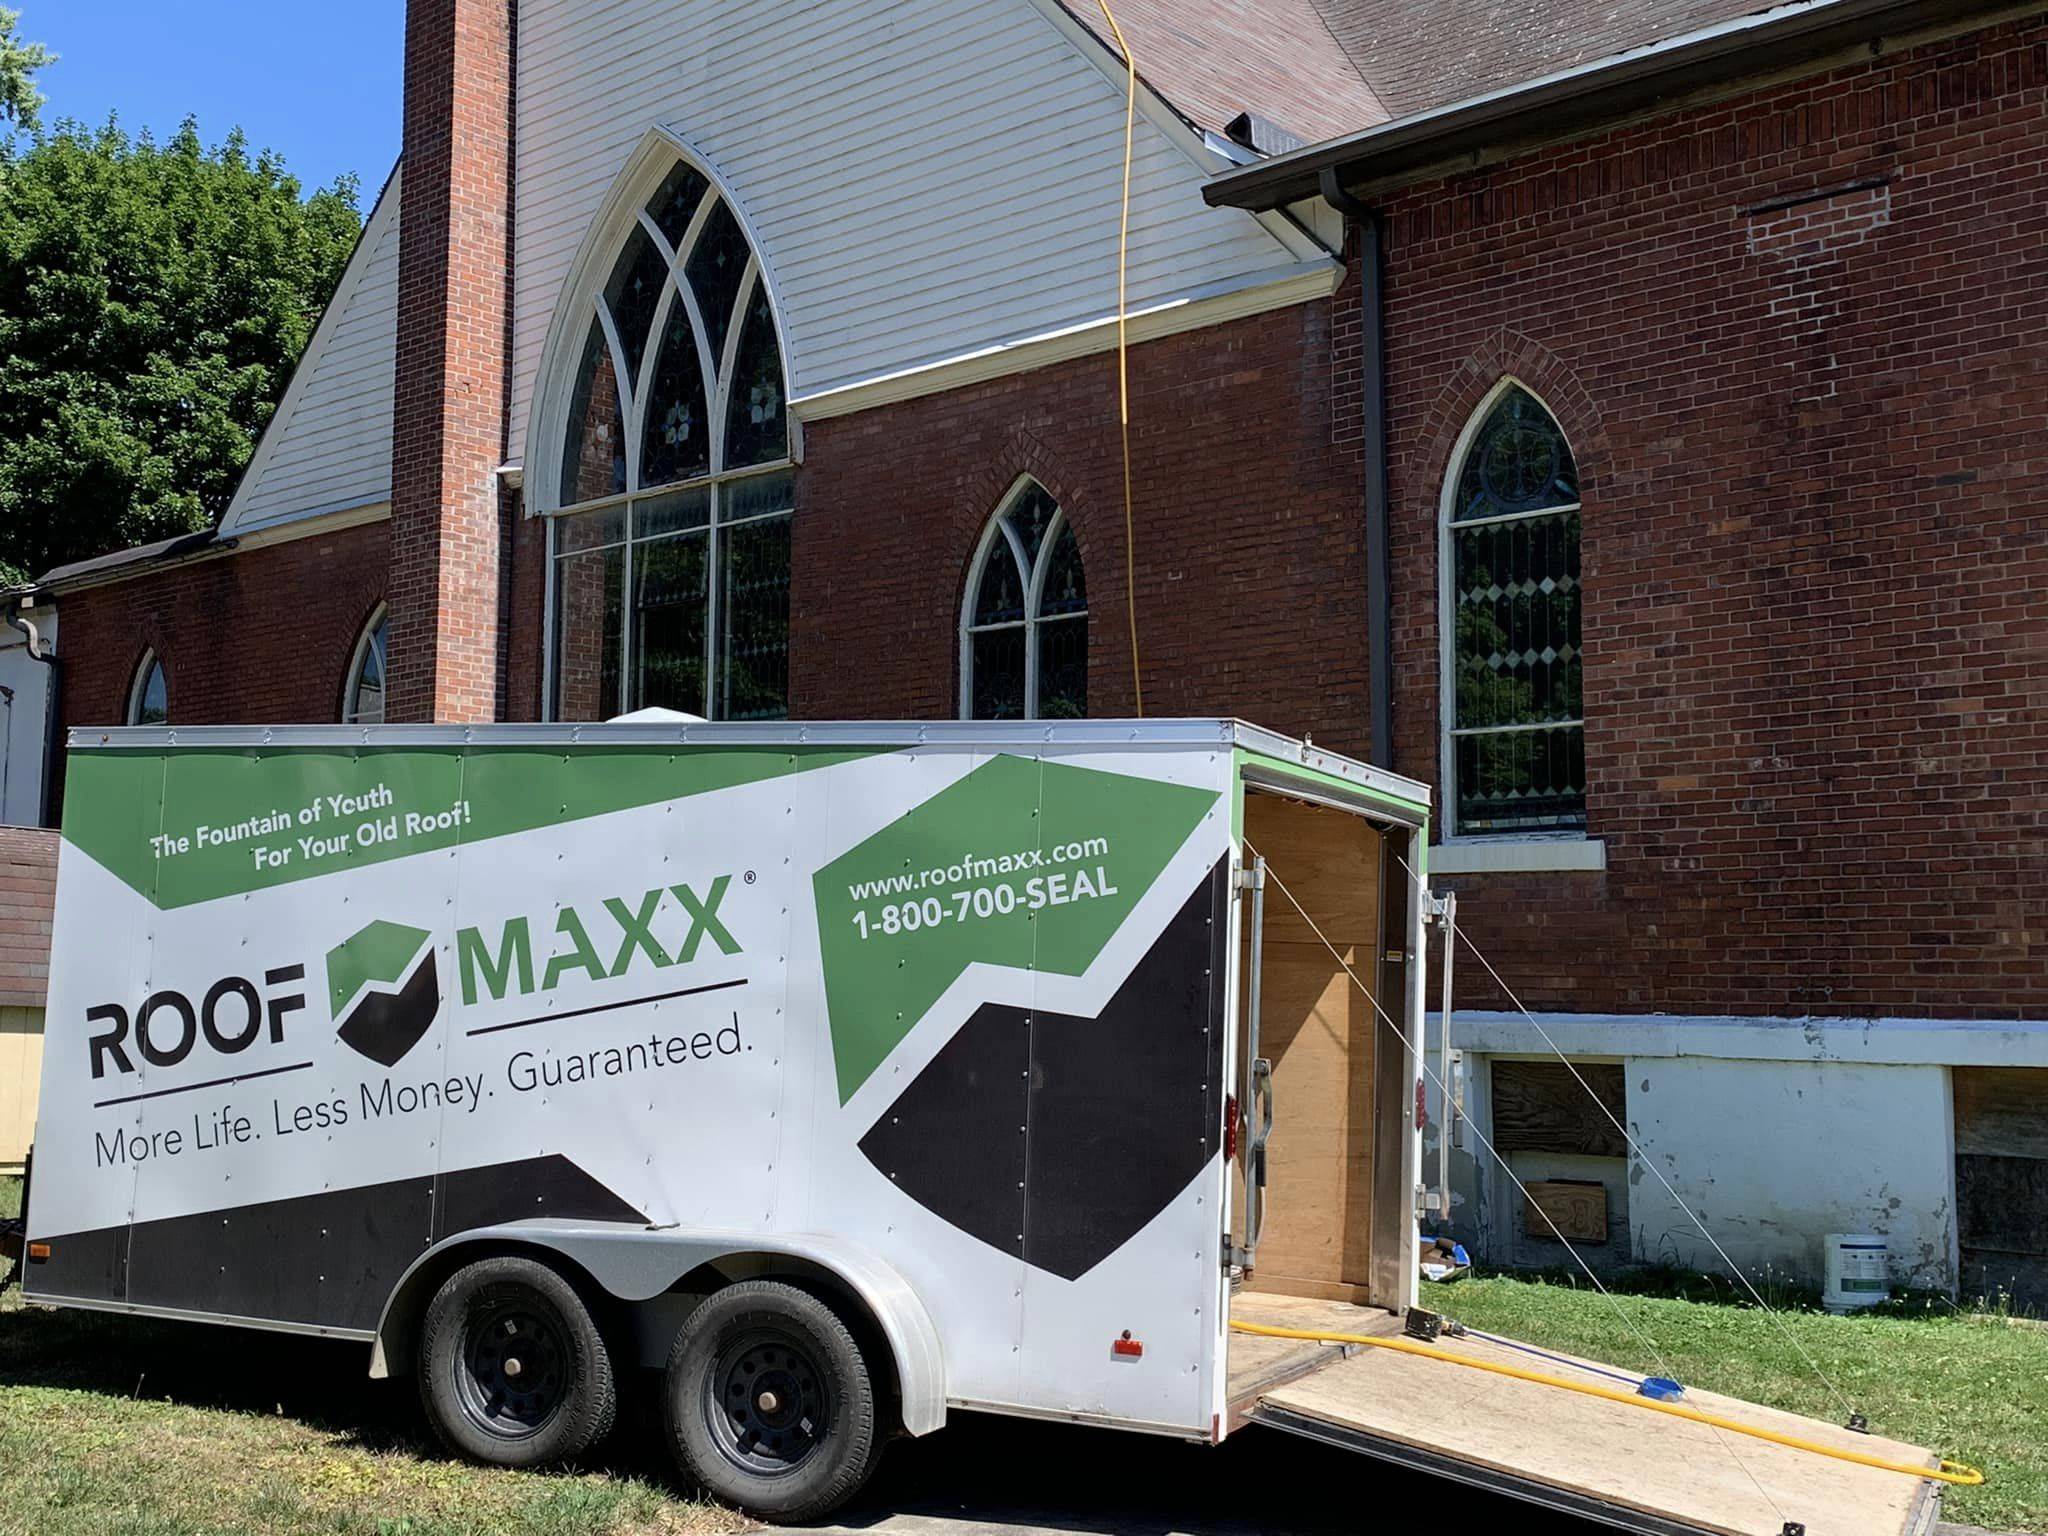 Green Roof Technologies is using Roof Maxx to restore the roof at His Havens Southside Outreach Center